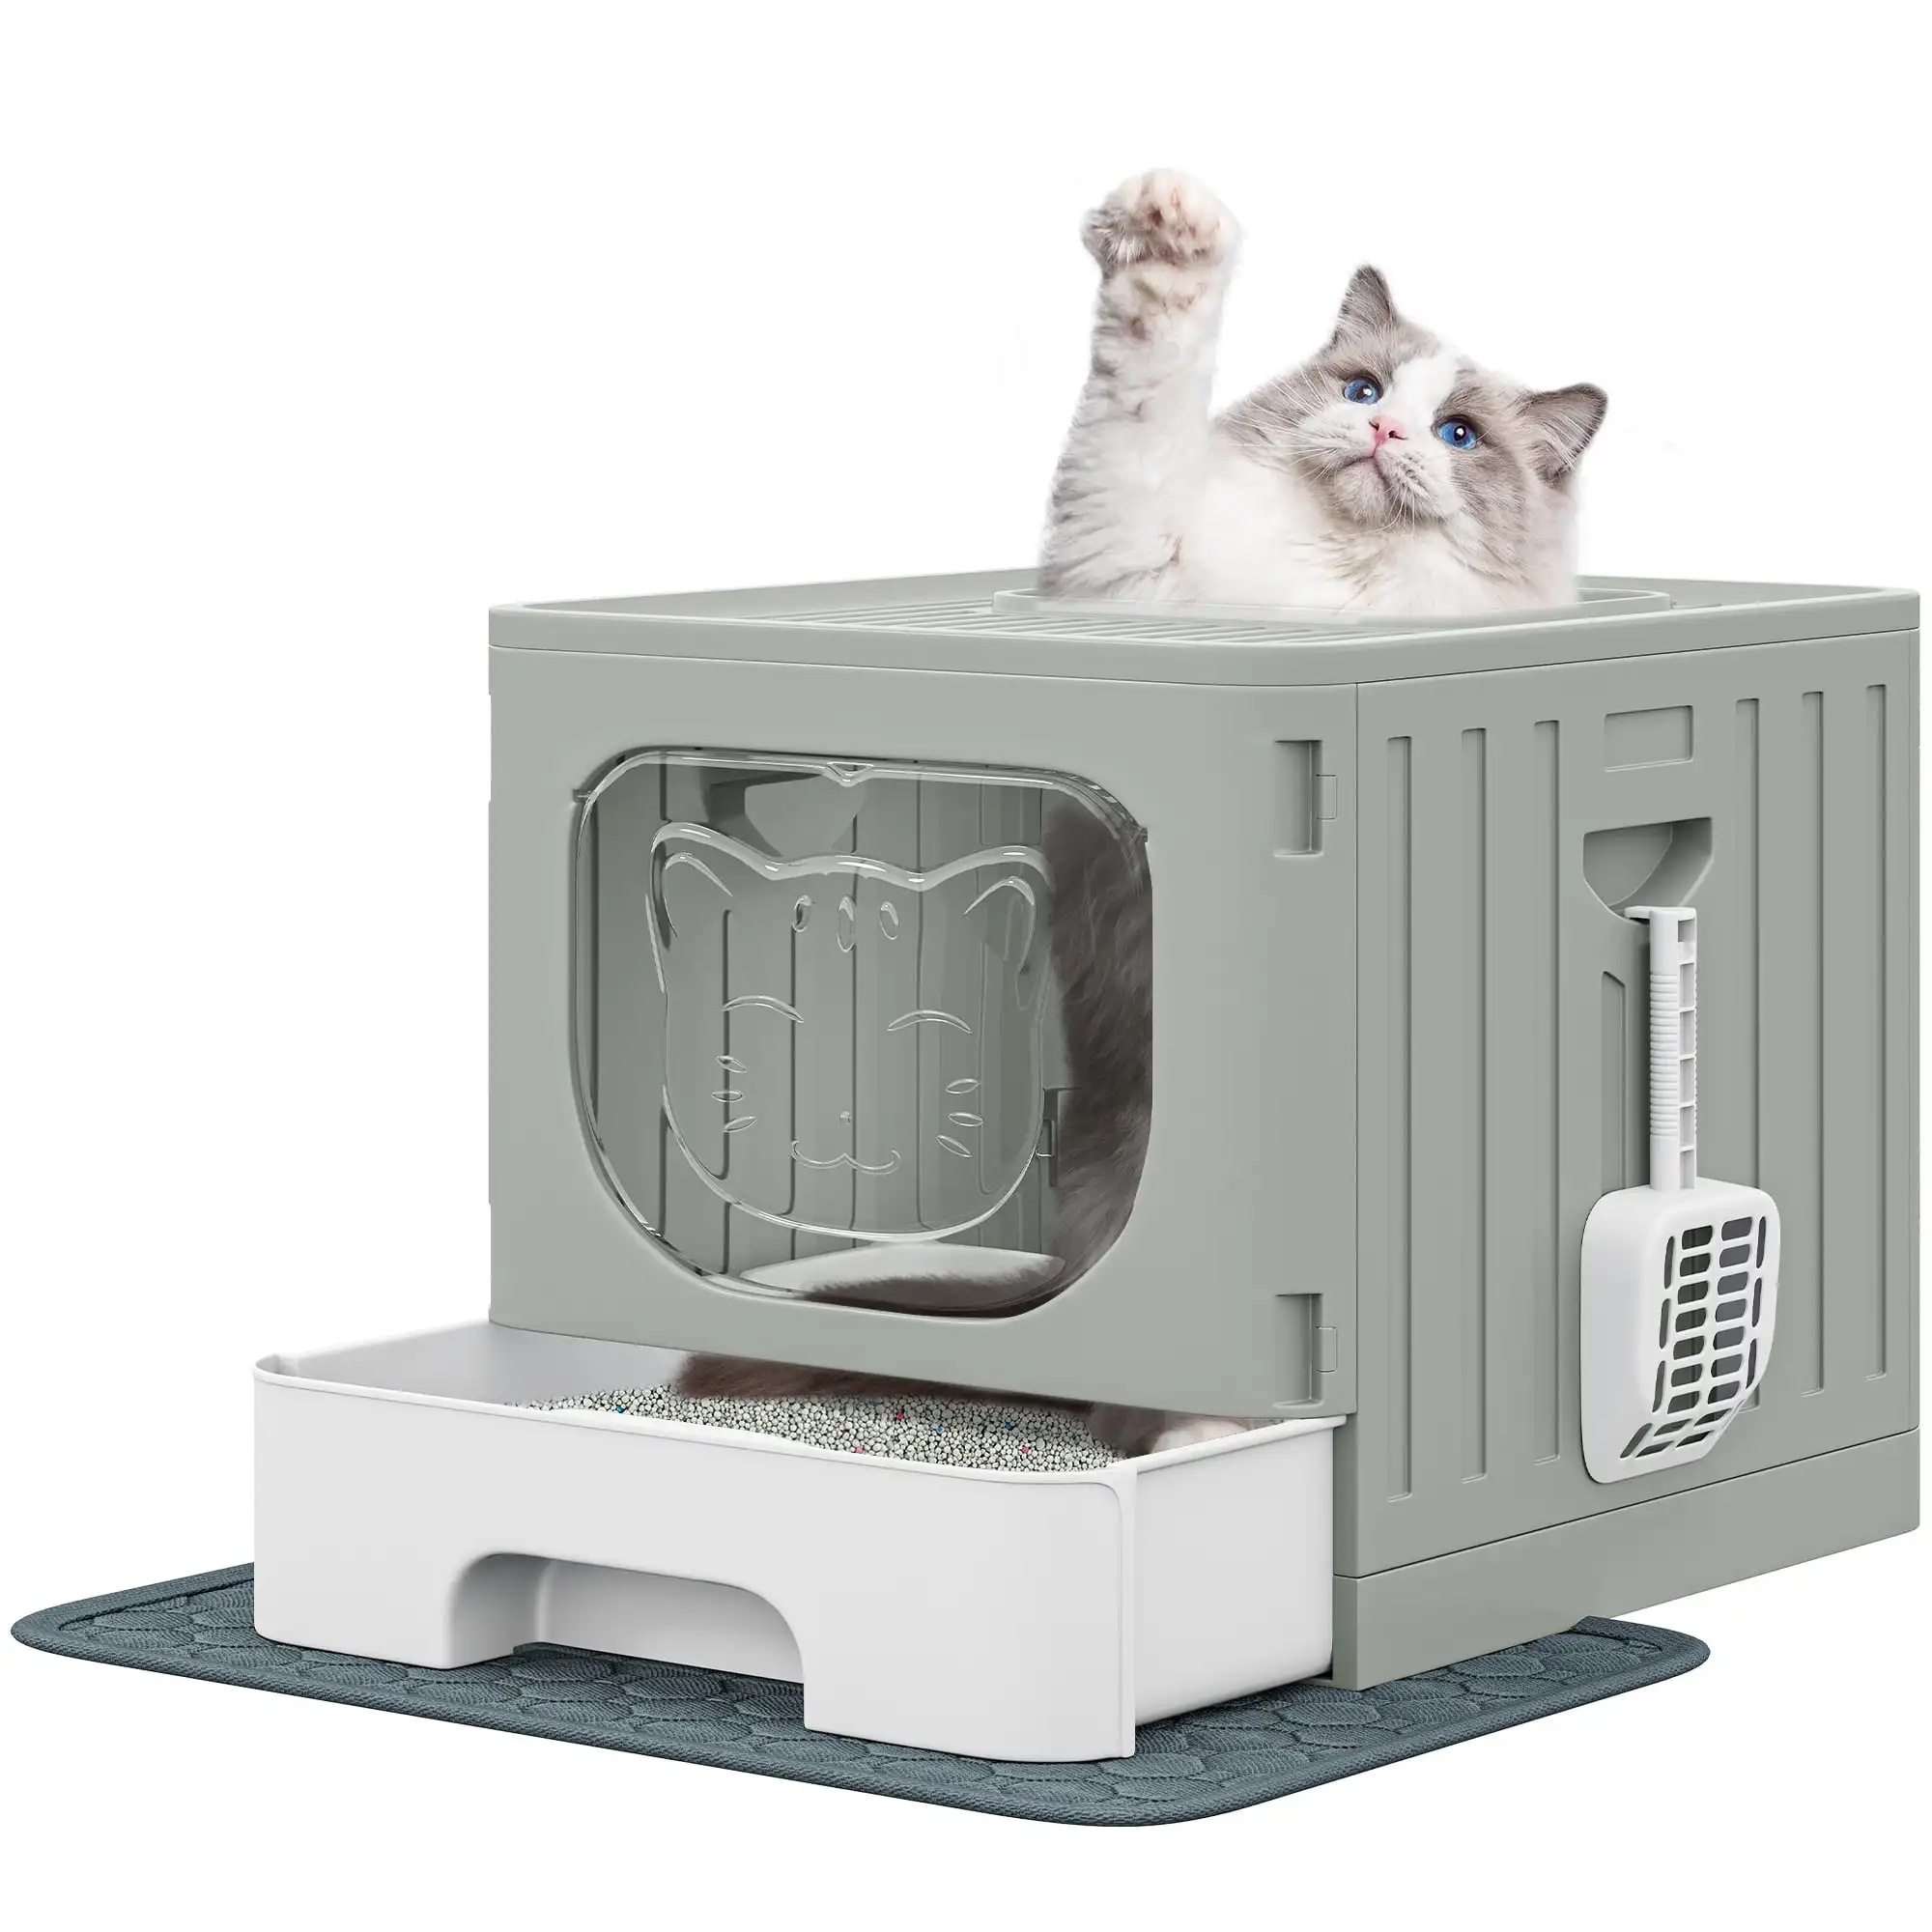 

Dextrus Large Enclosed Cat Litter Box with Cushion & Litter Scoop,Front Entry Top Exit Door,Cat Self-Grooming Deodorizer